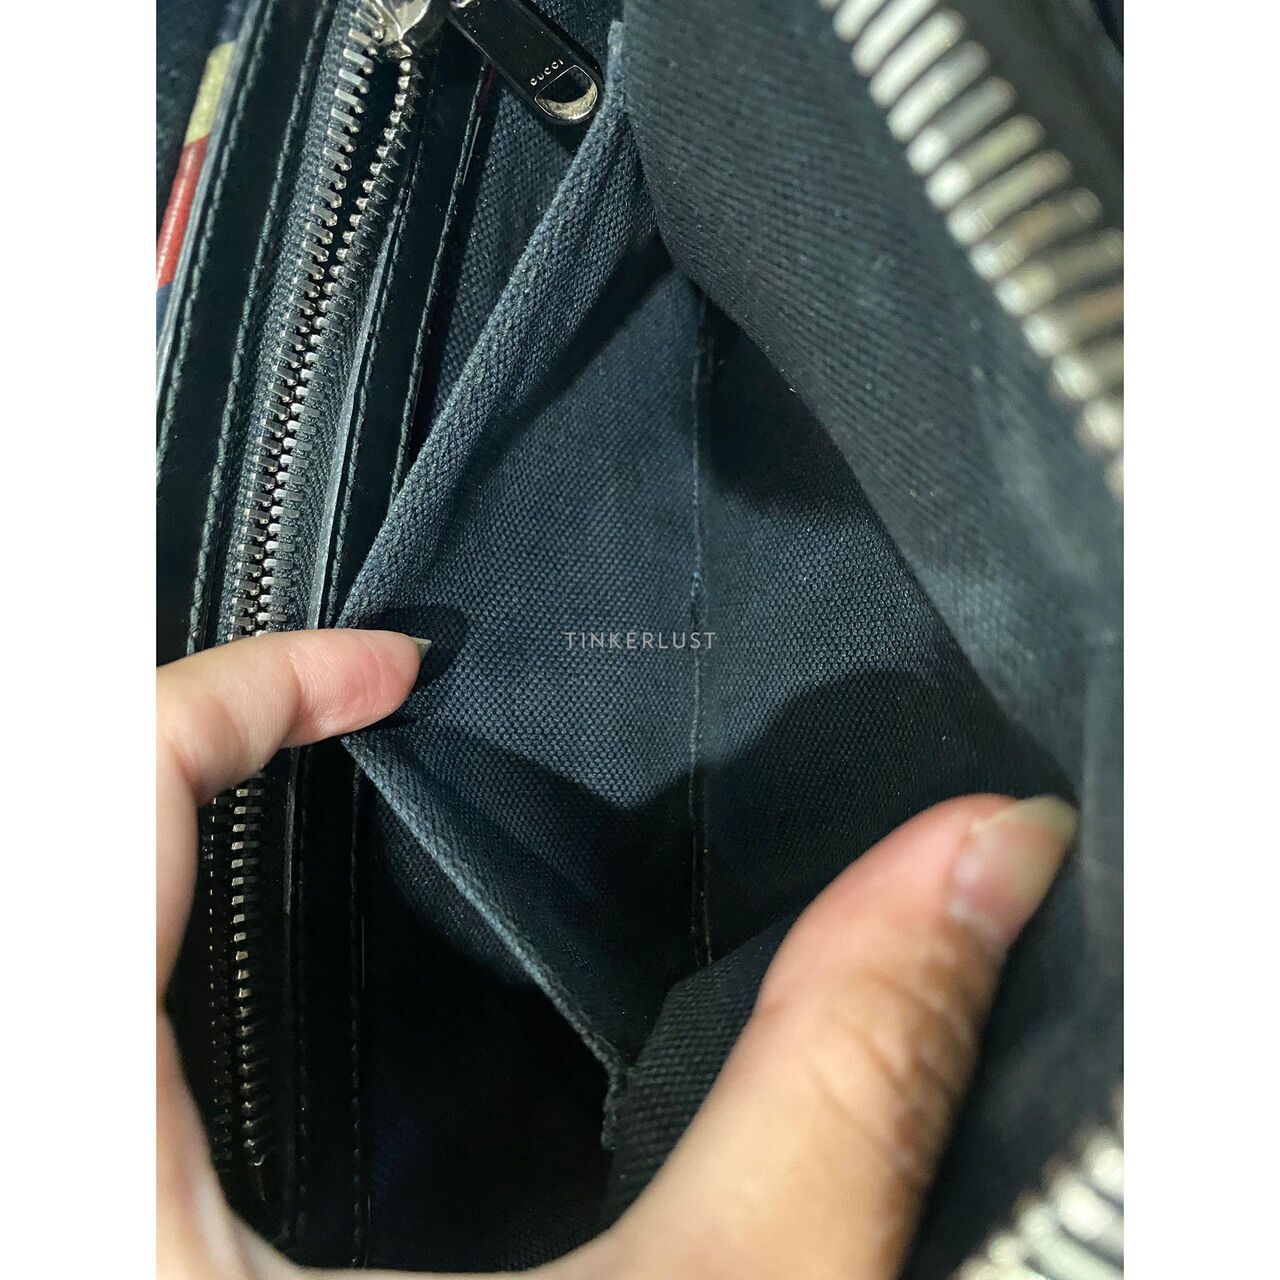 Gucci Bumbag Night Courier SHW Sling Bag